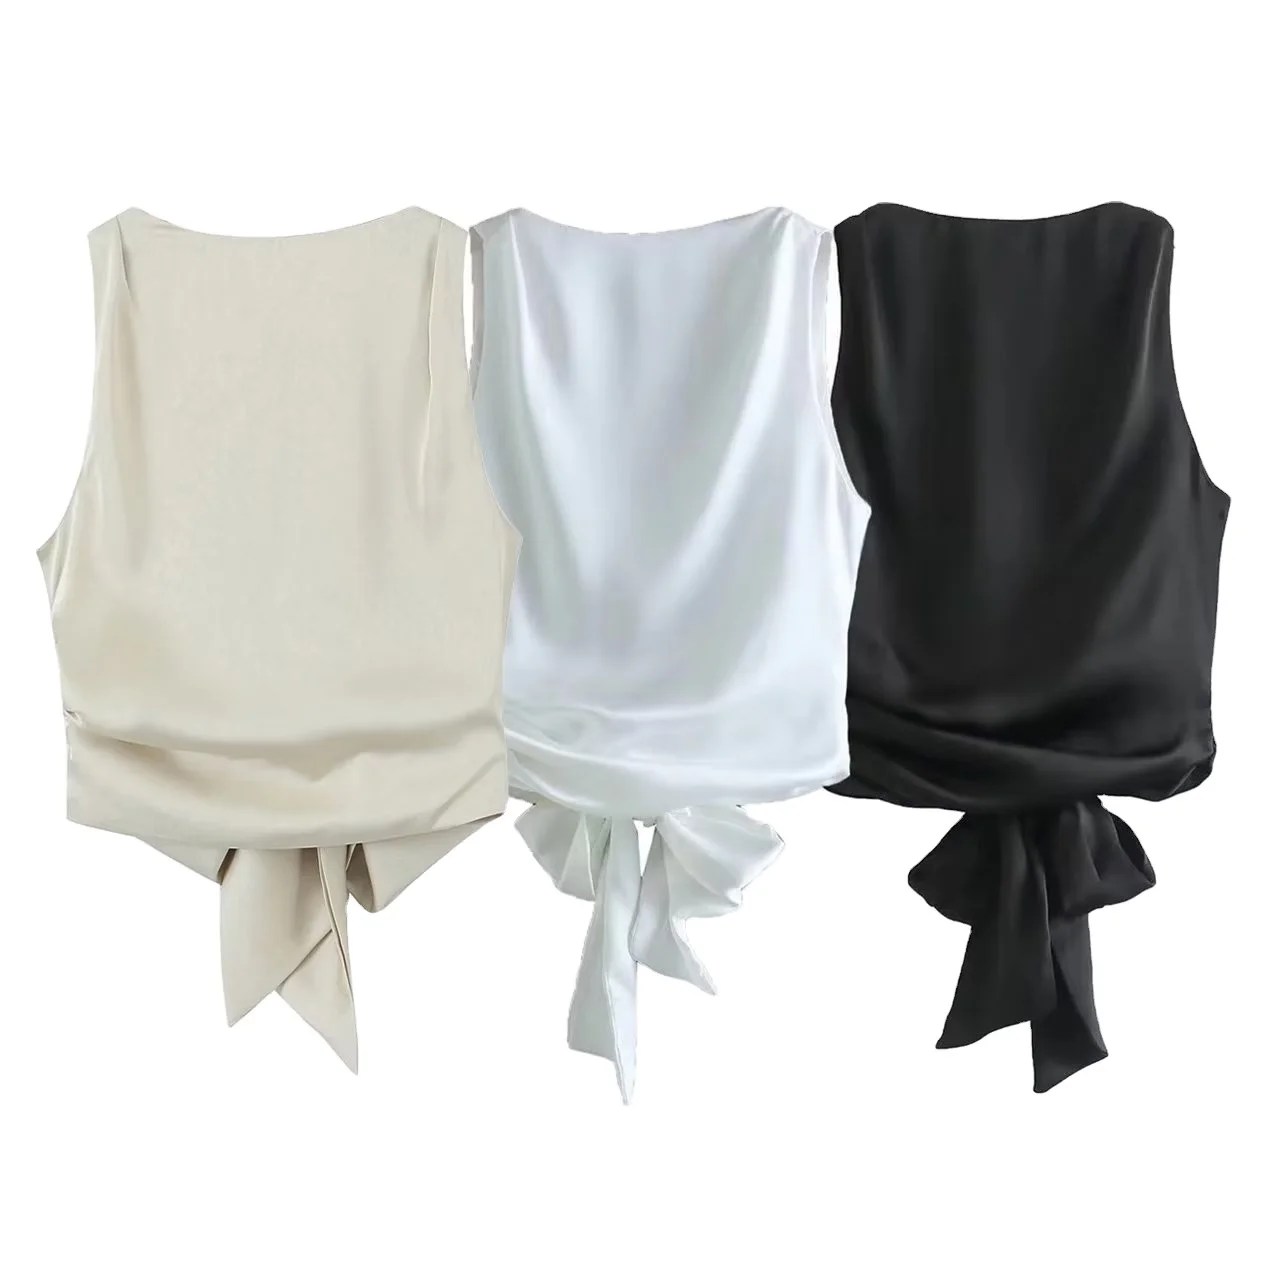 Women summer New Fashion Backless silk satin top Vintage Backless Female Camis Chic Tops